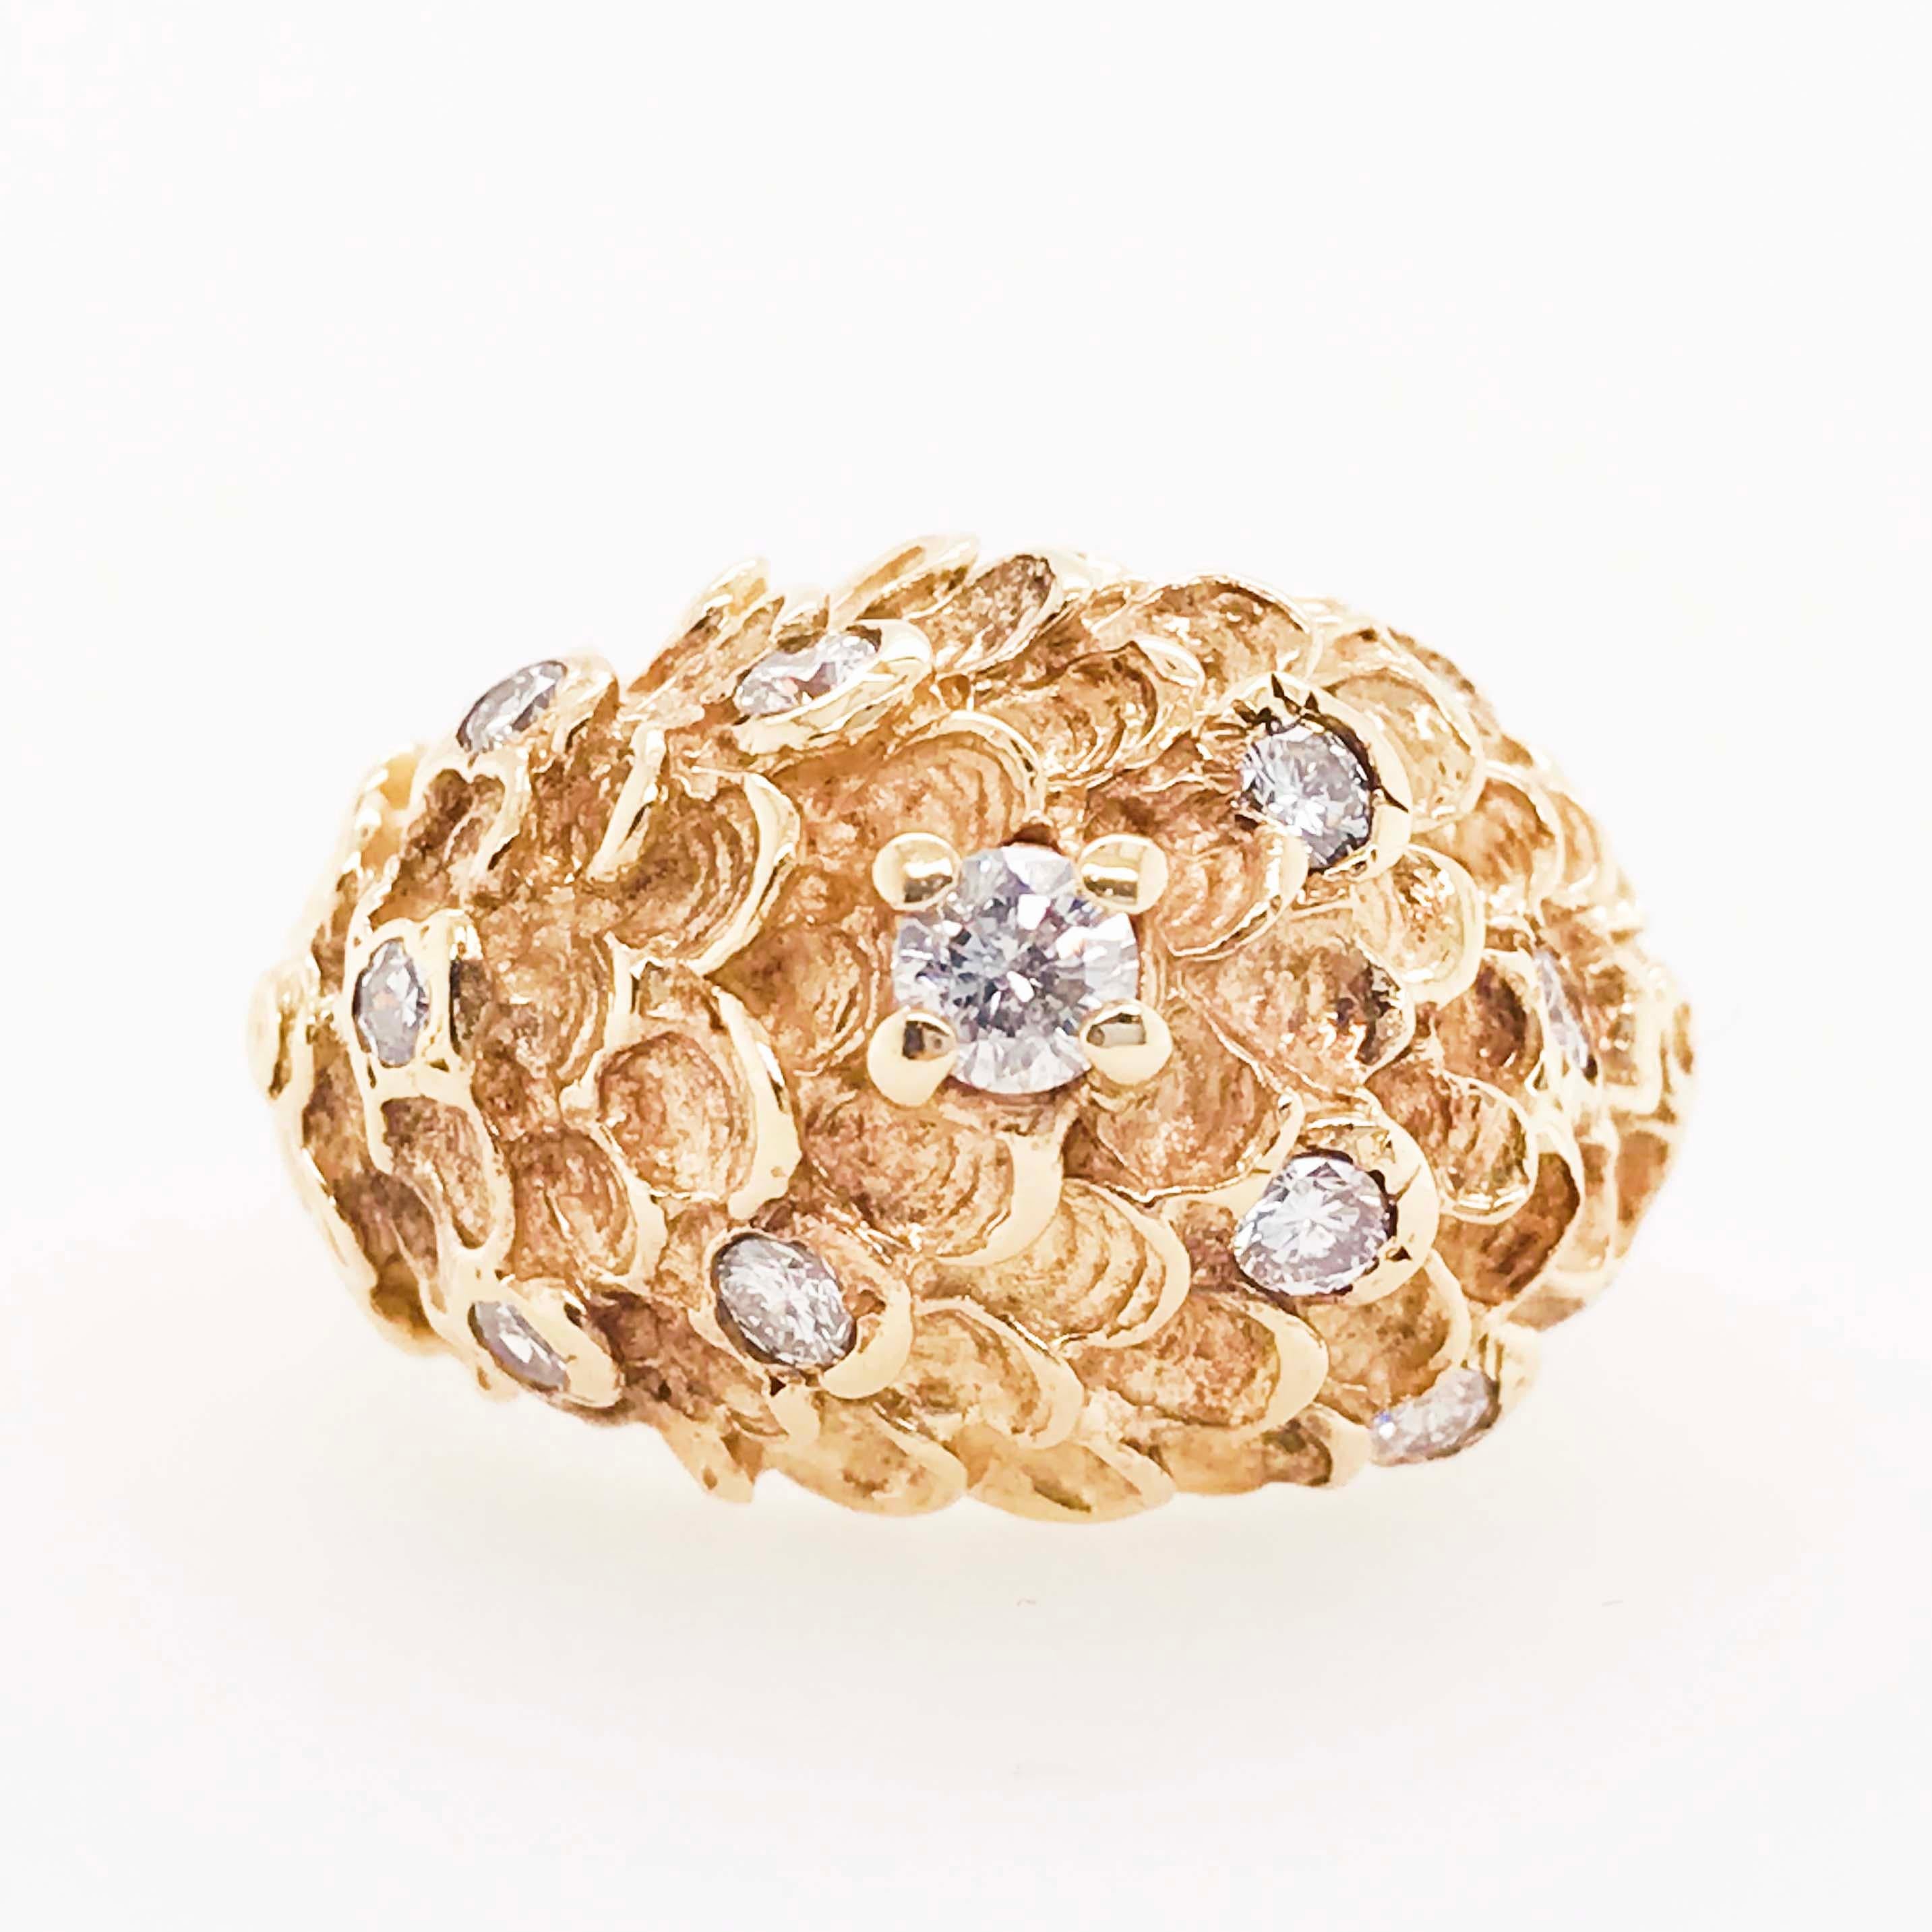 Diamond cocktail rings are always statement pieces with unique designs and quality diamonds or gemstones! This diamond cocktail ring is a dome setting with an extraordinary design. The diamond dome ring has eleven round brilliant diamonds set in